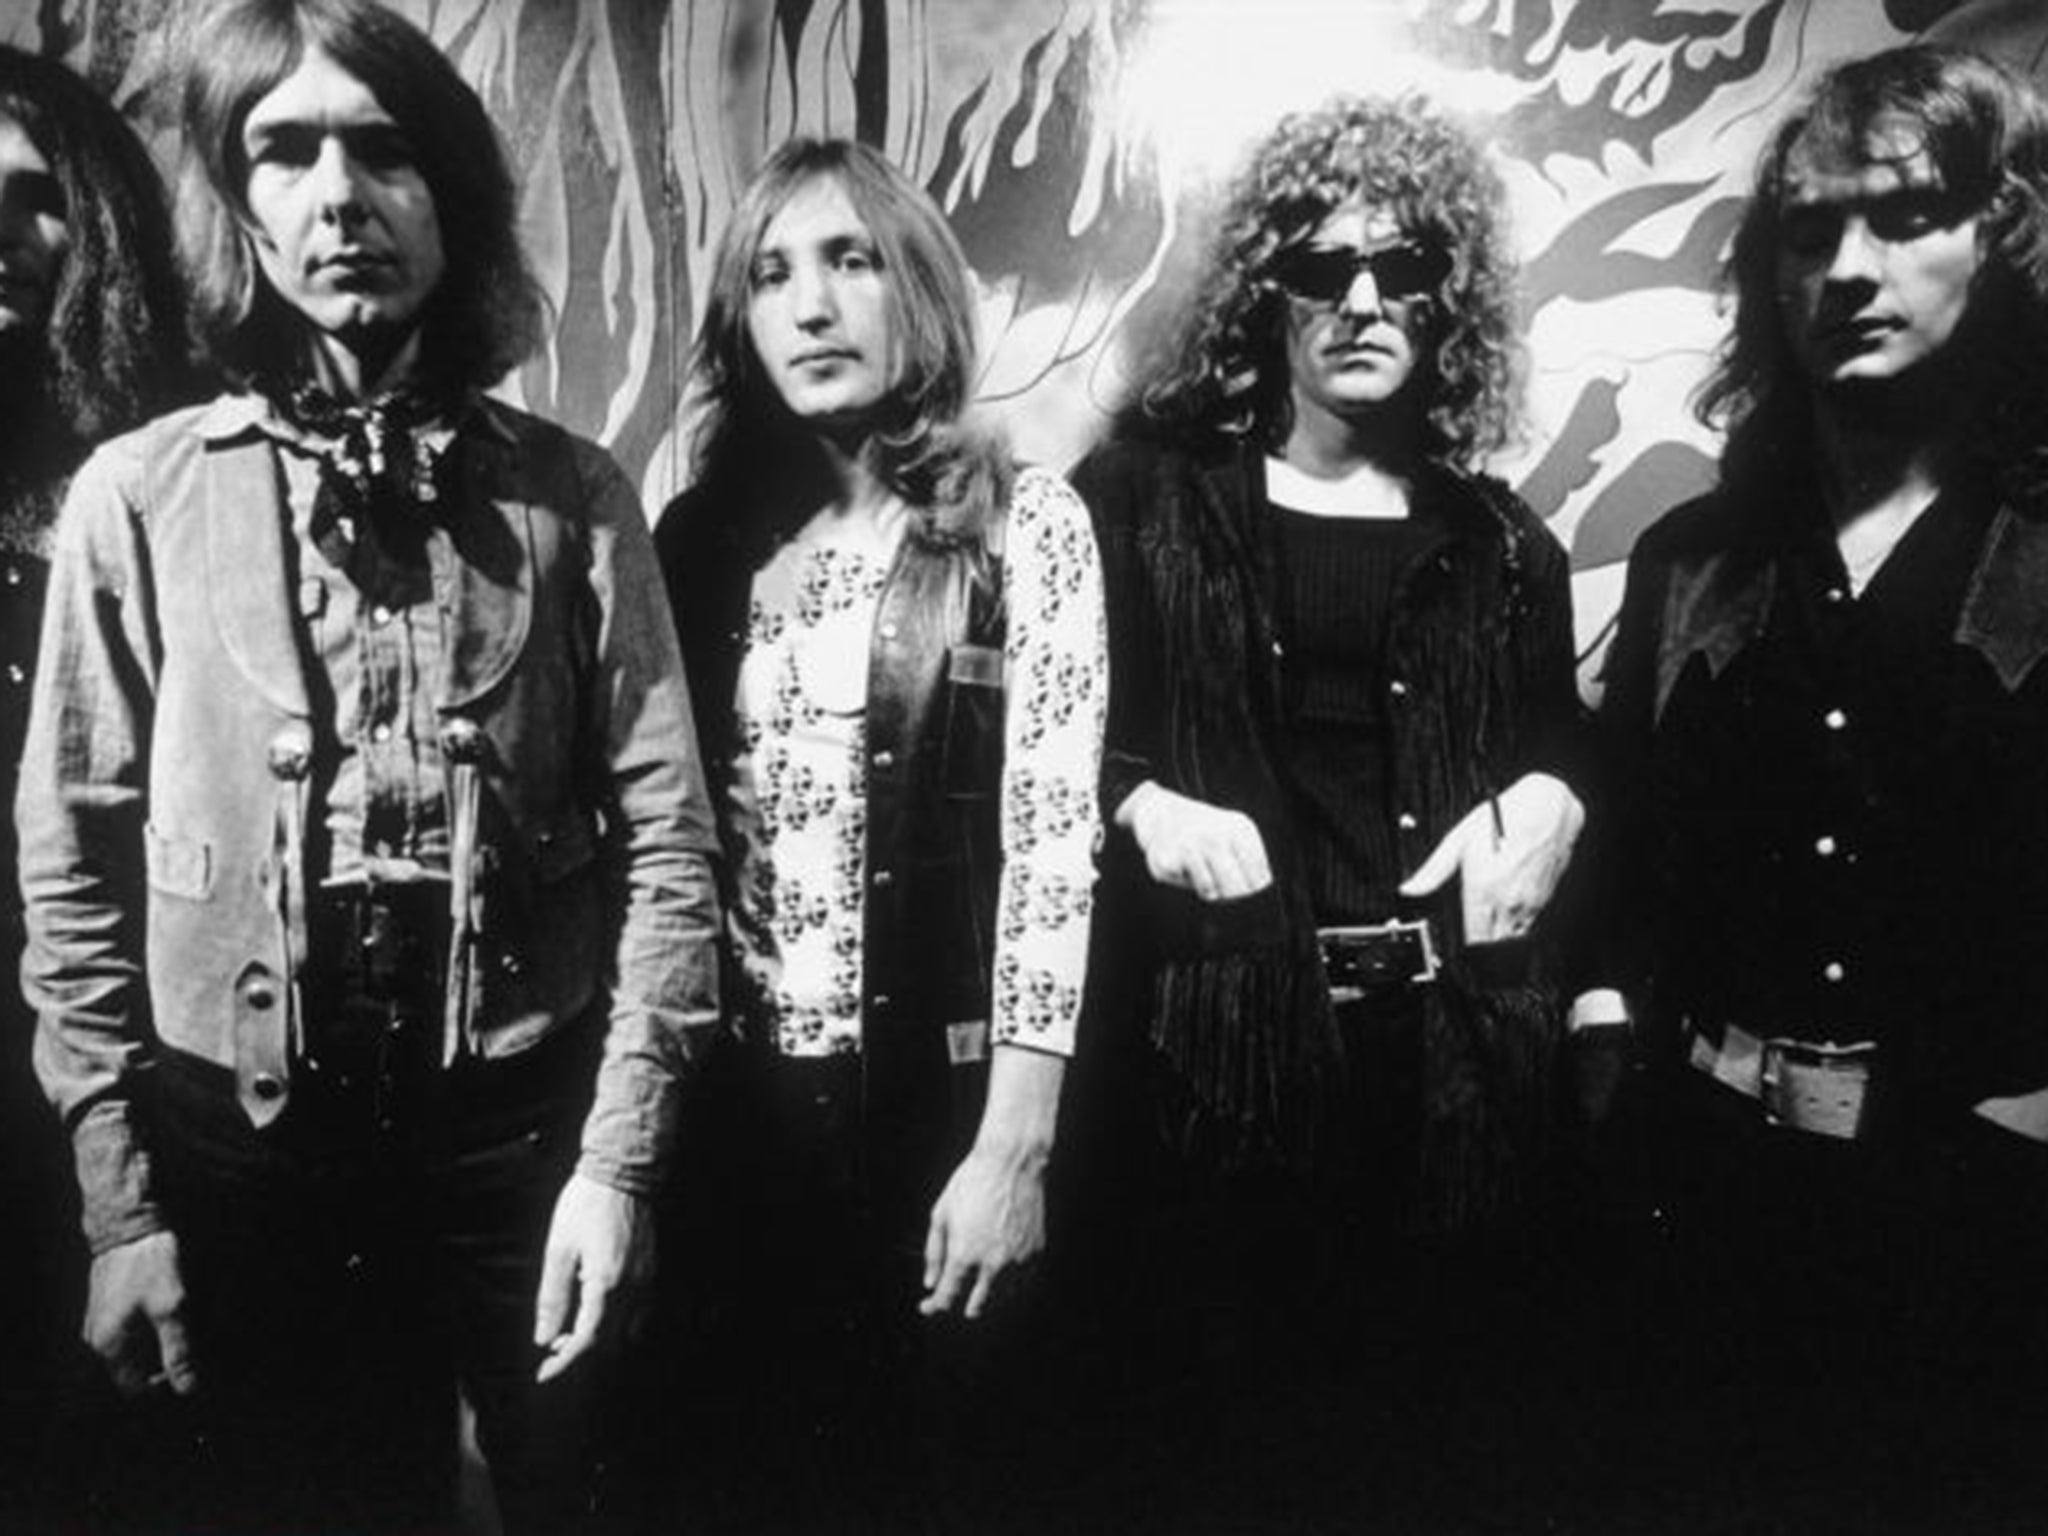 Mott the Hoople were gifted Bowie’s song and turned it into the perfect 1970s pop single